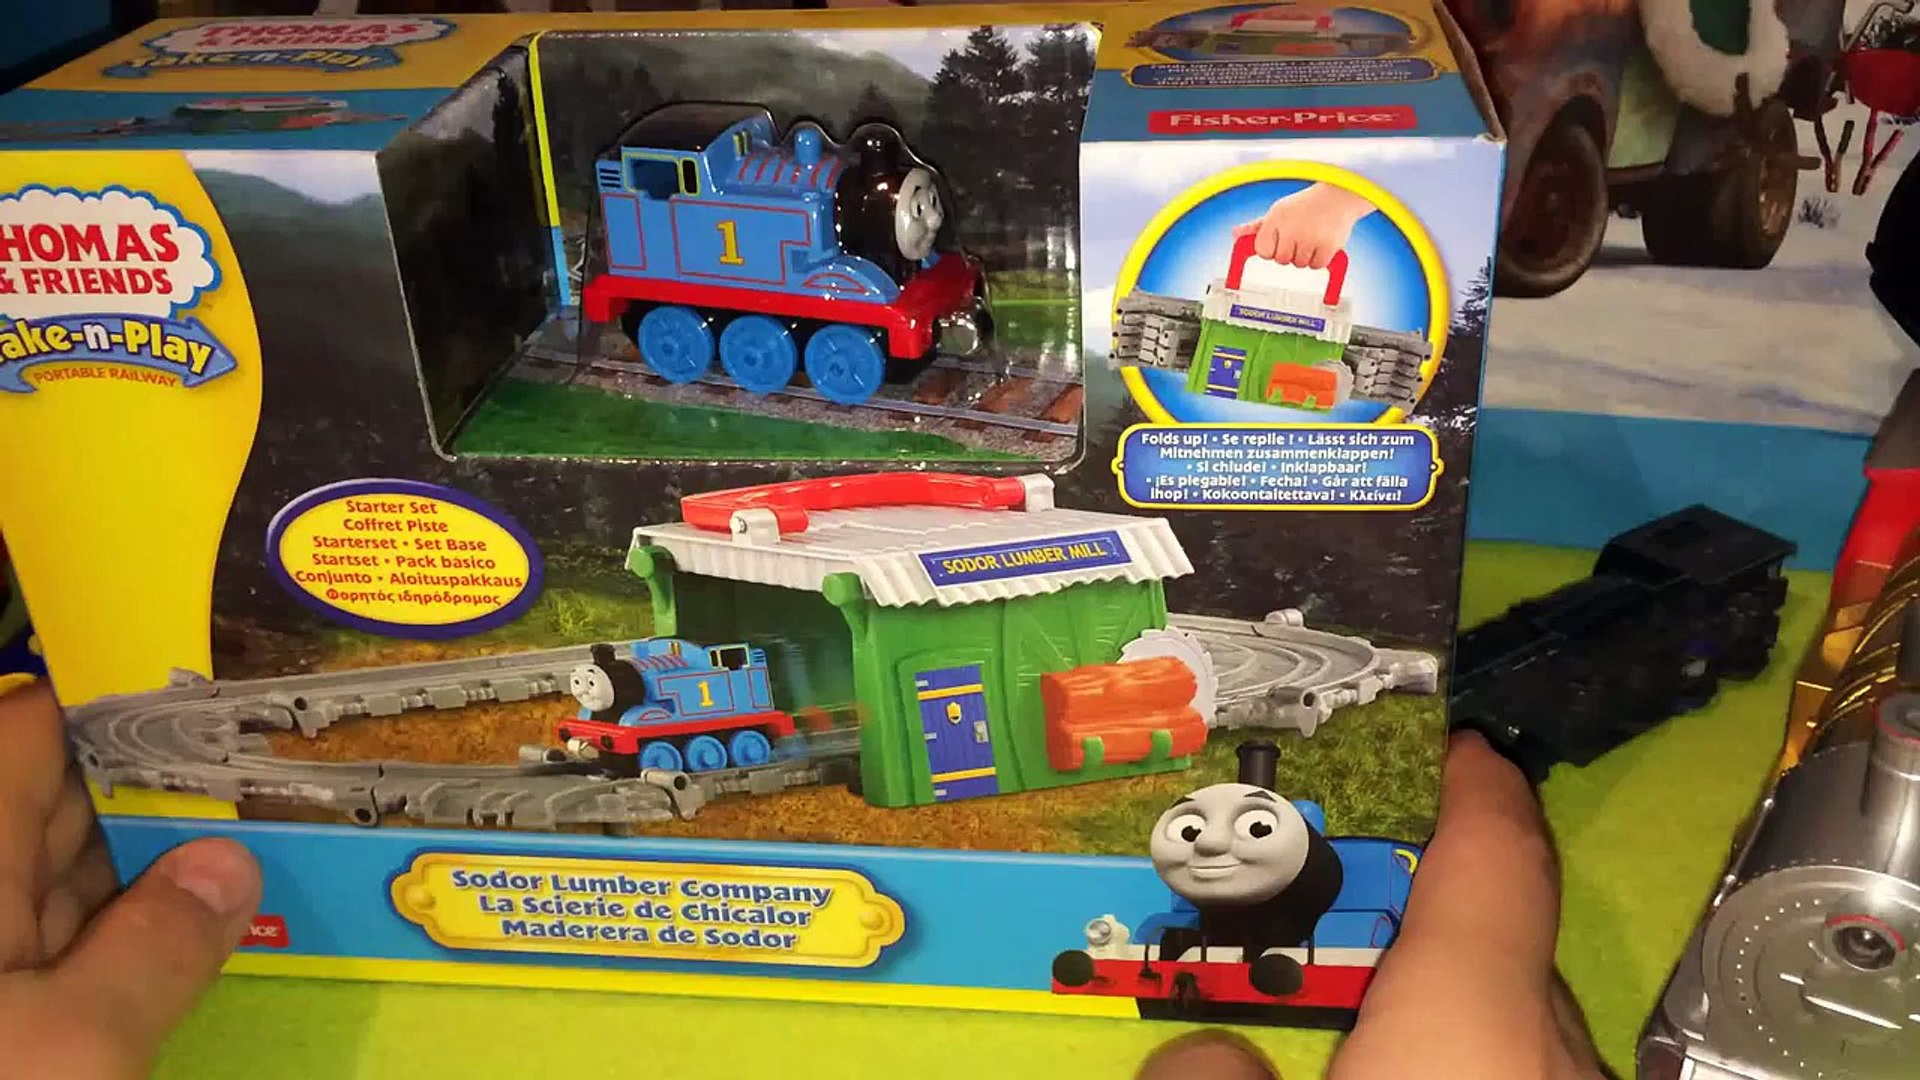 ⁣Thomas and Friends Thomas The Tank Engine,игрушка поезд Томас и Друзья на русском языке